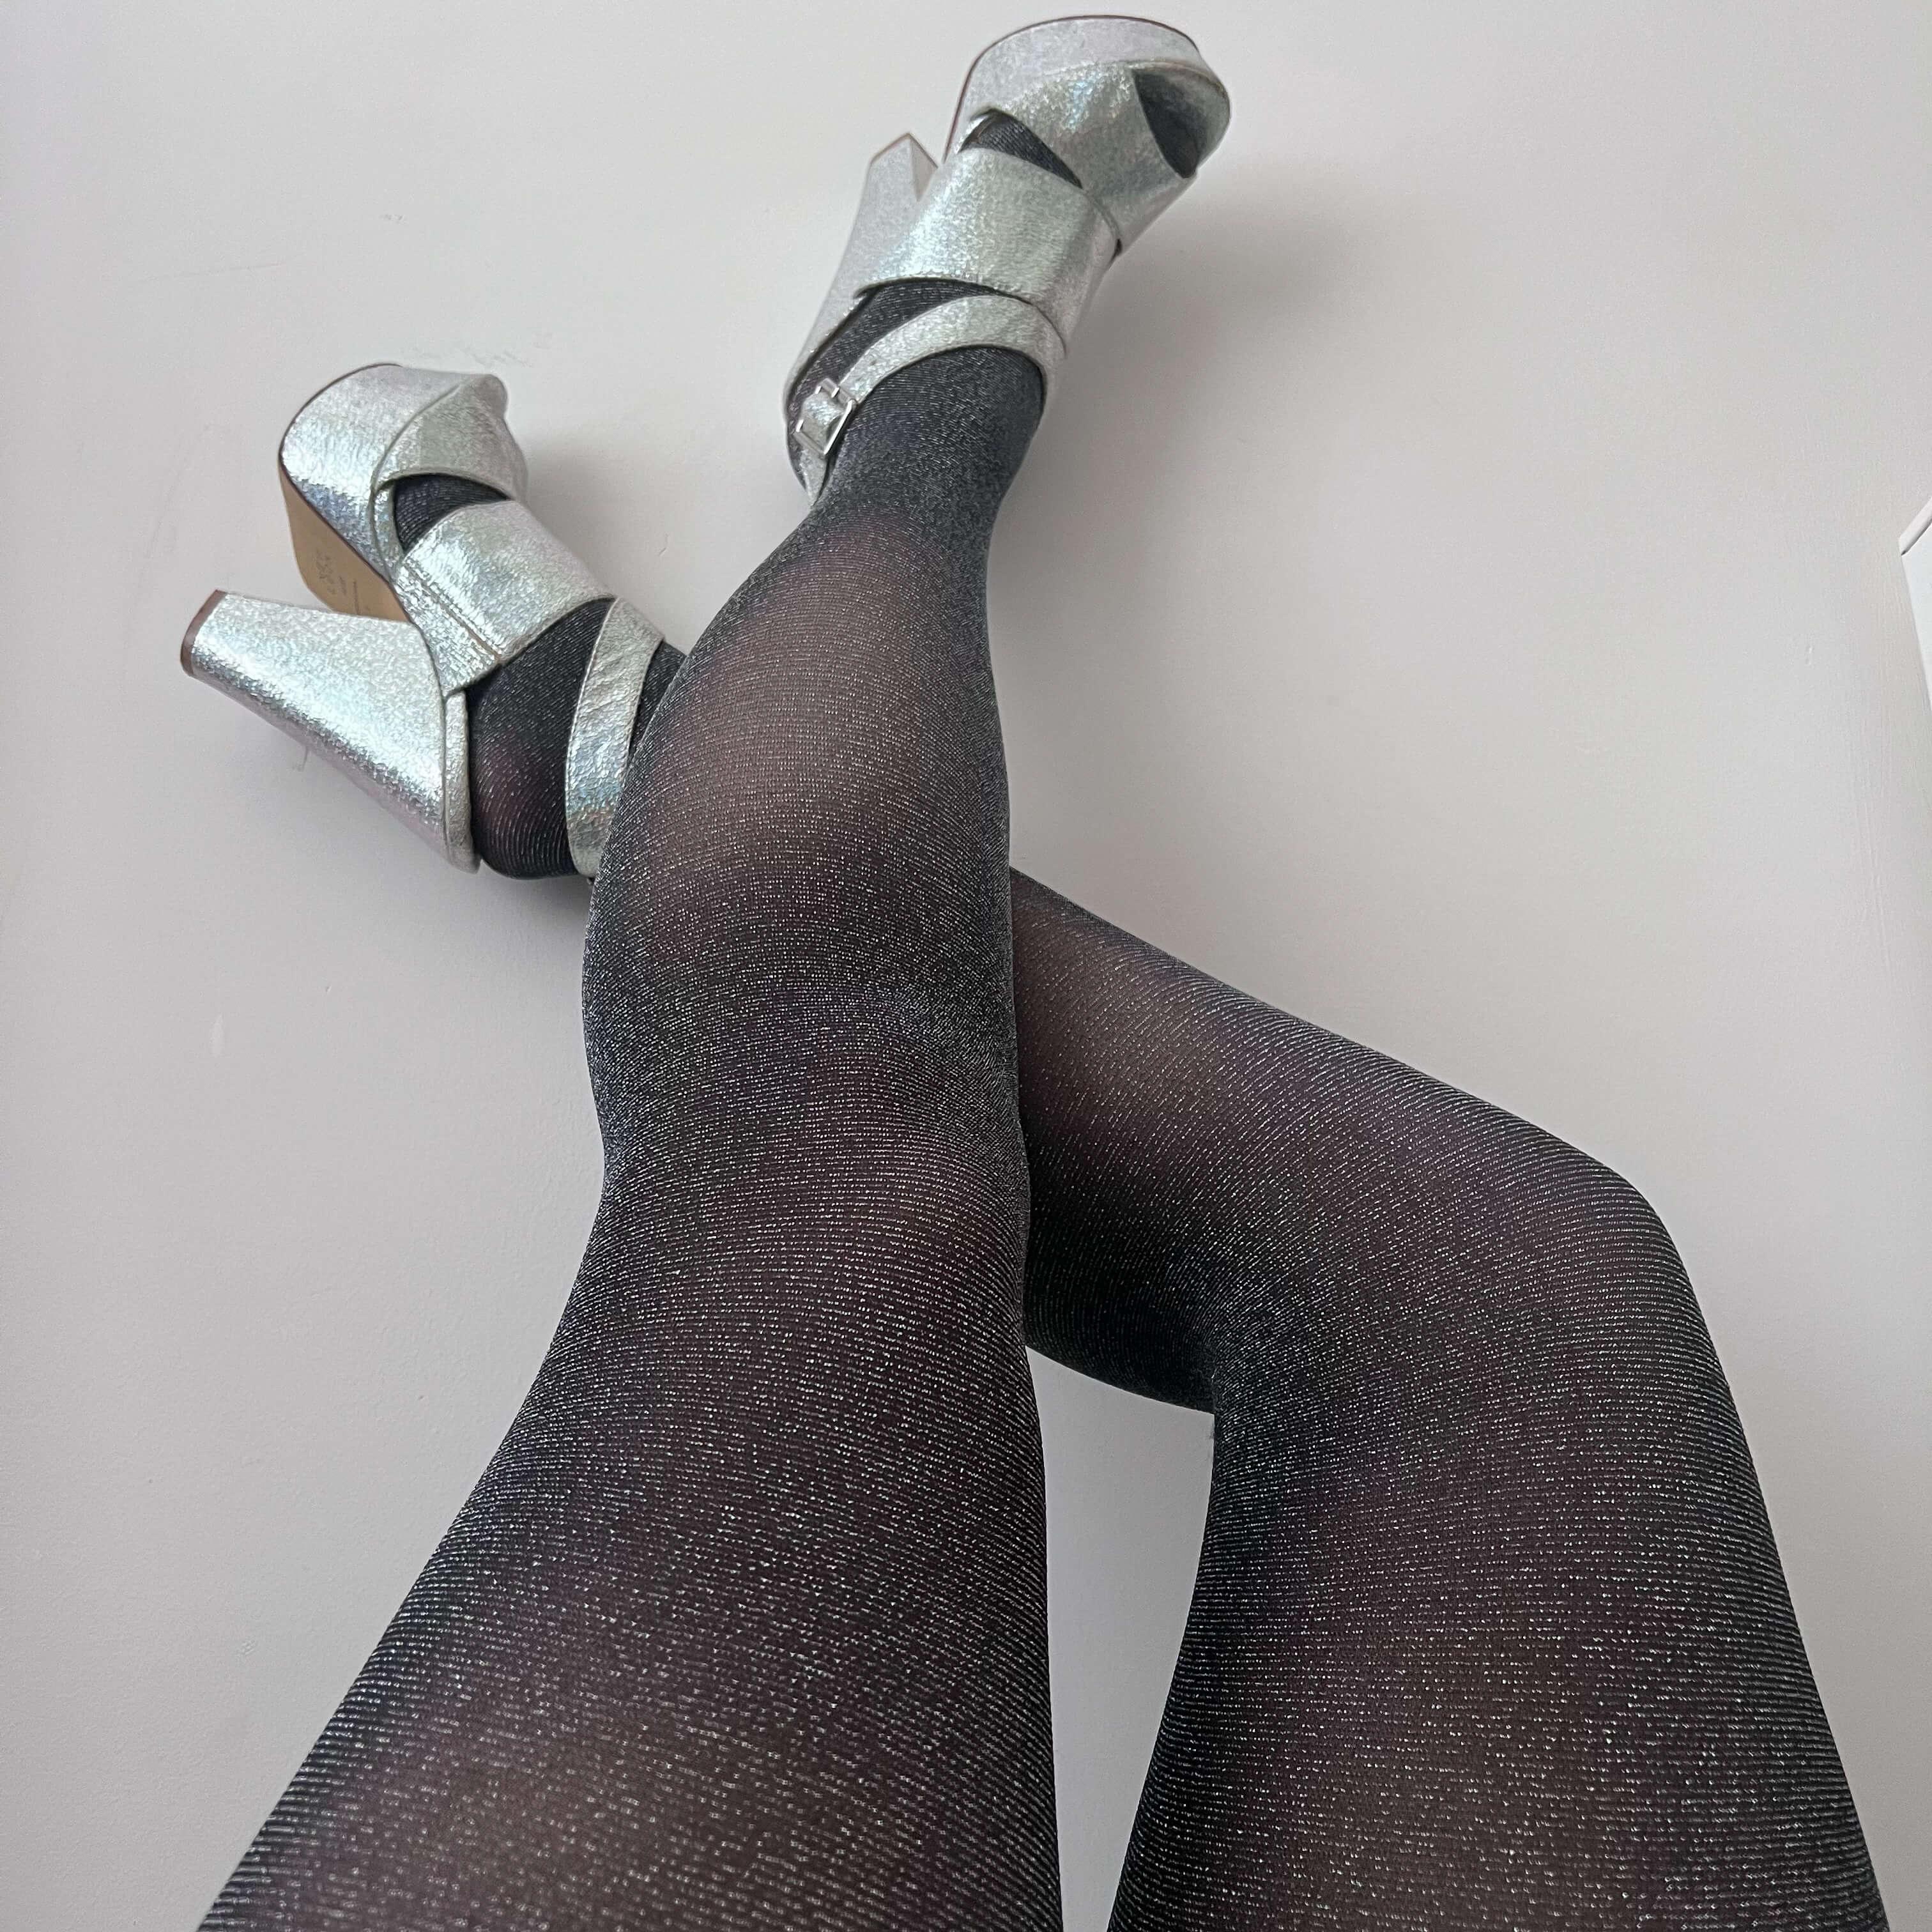 Sheer Glitter Tights In Black - Epic Party Tights